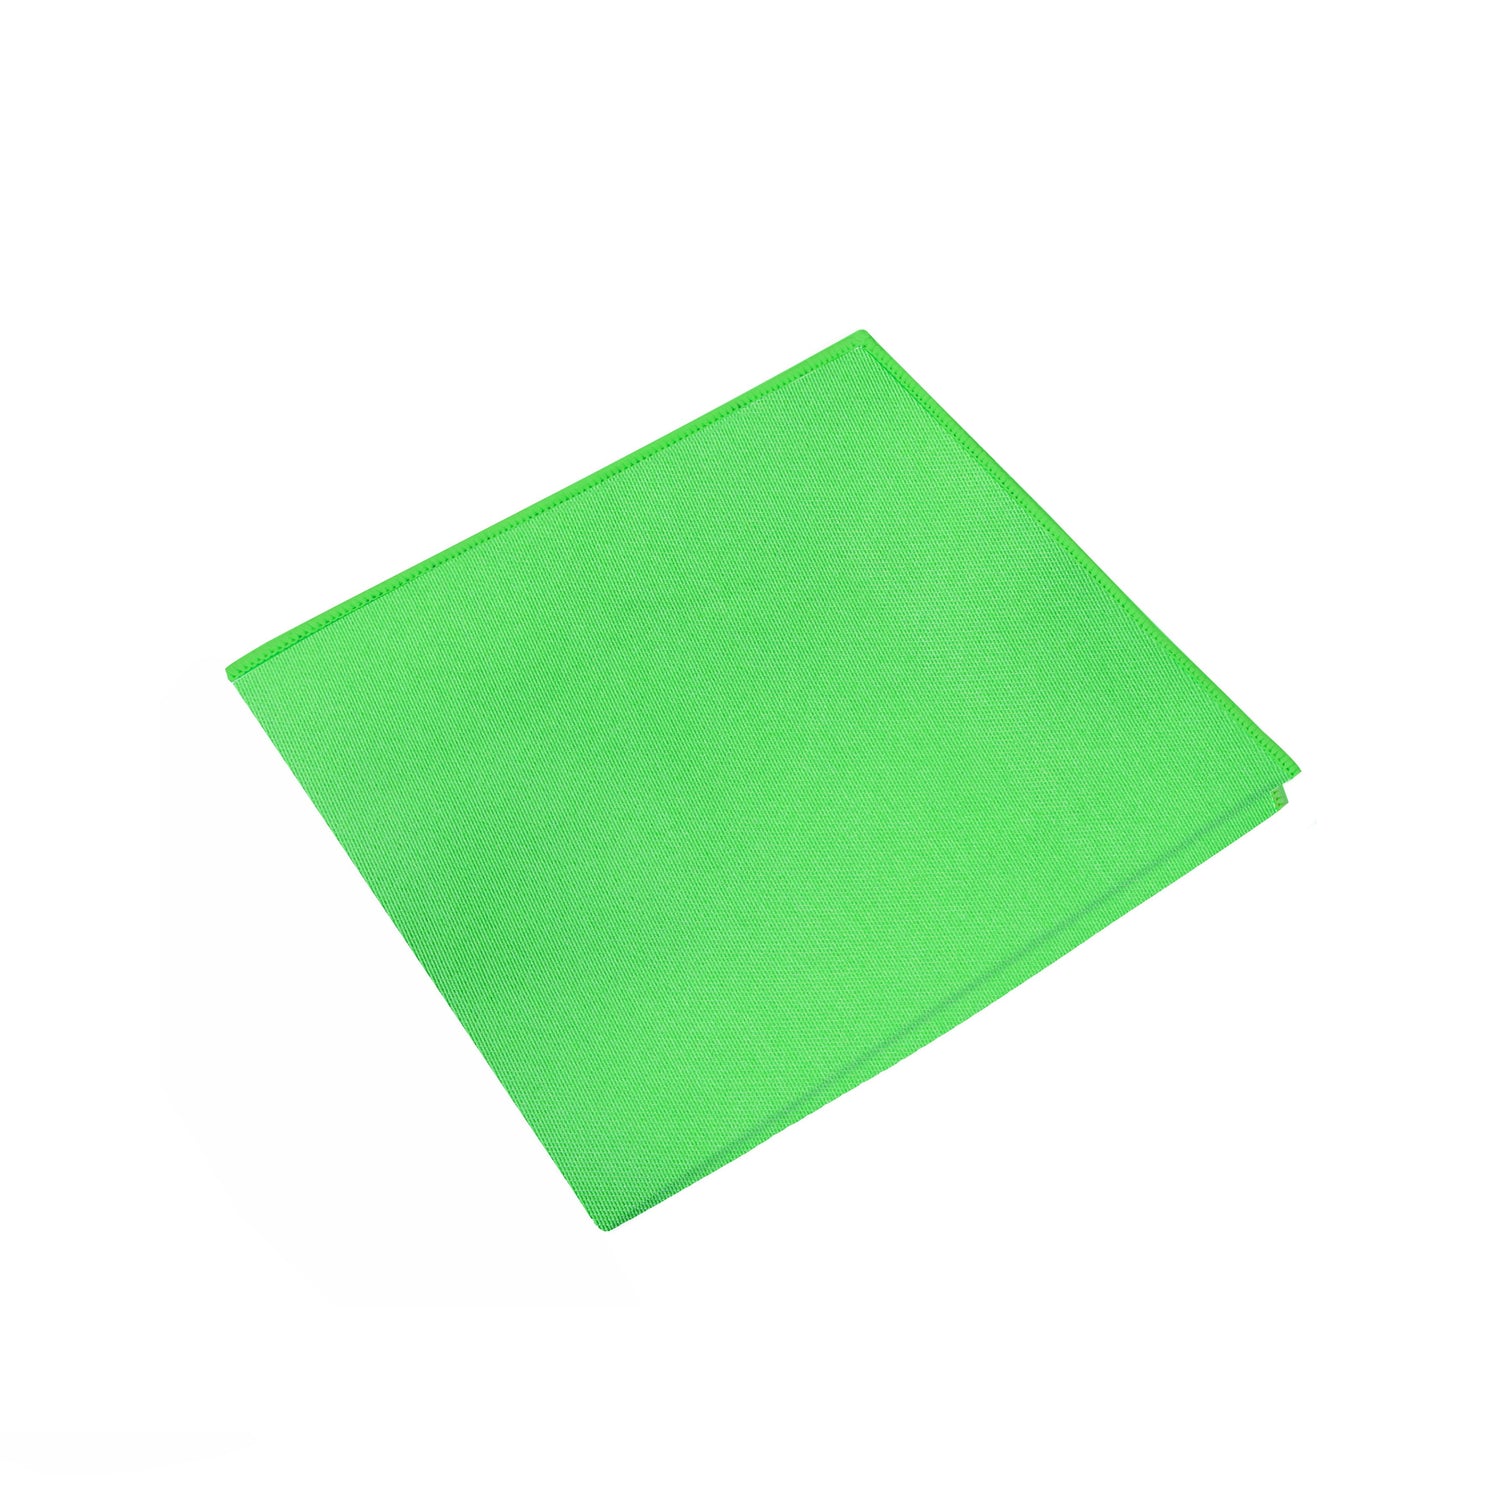 Green with Green Edges Pocket Square